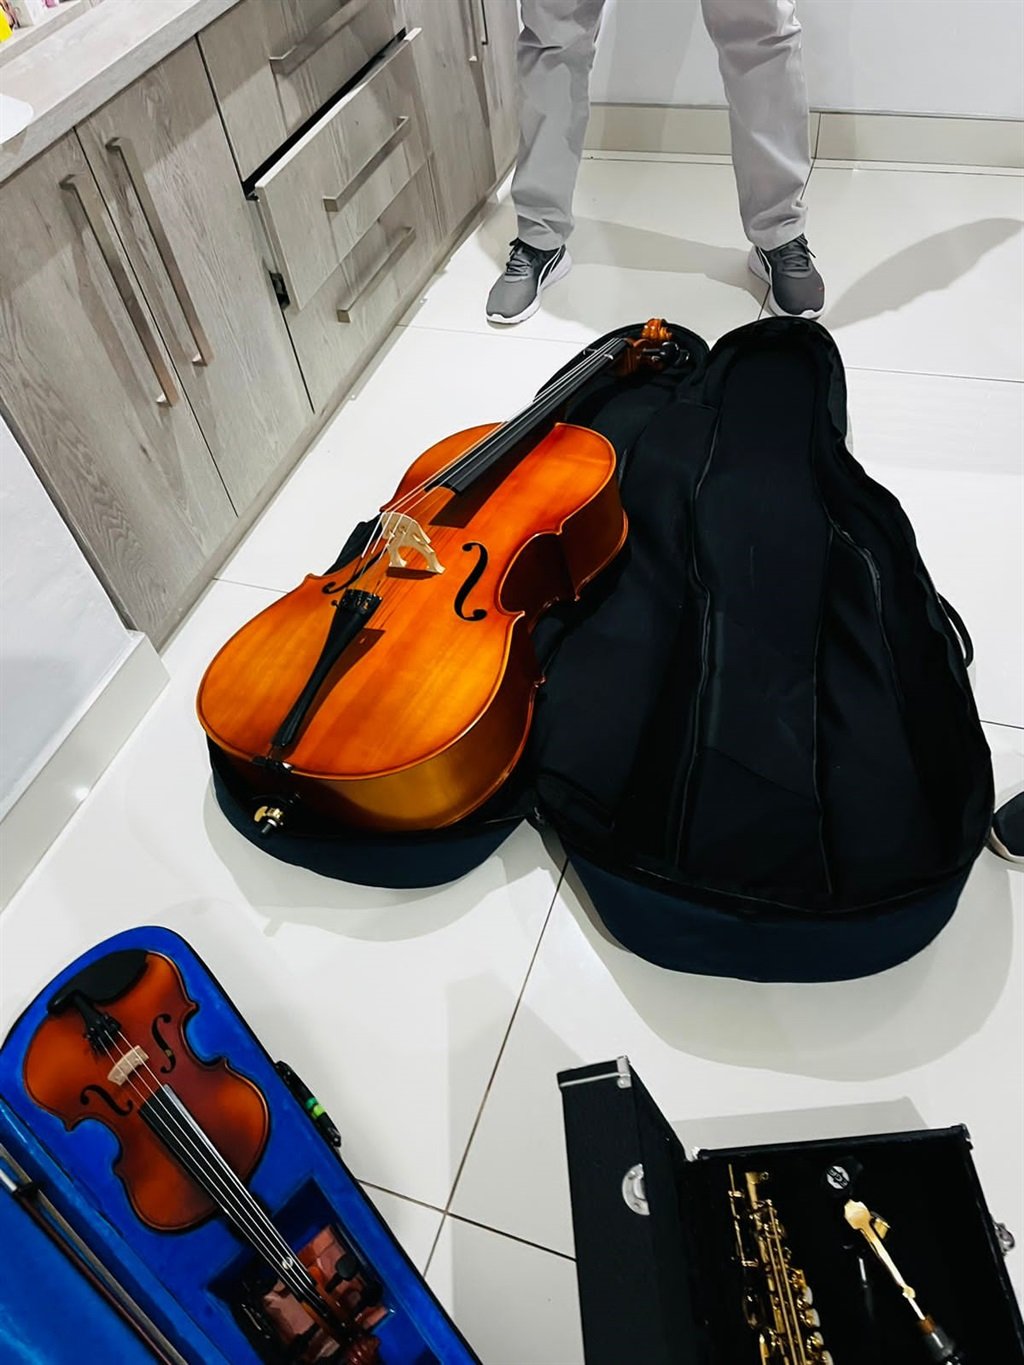 High-end violins in cases seized by NPA